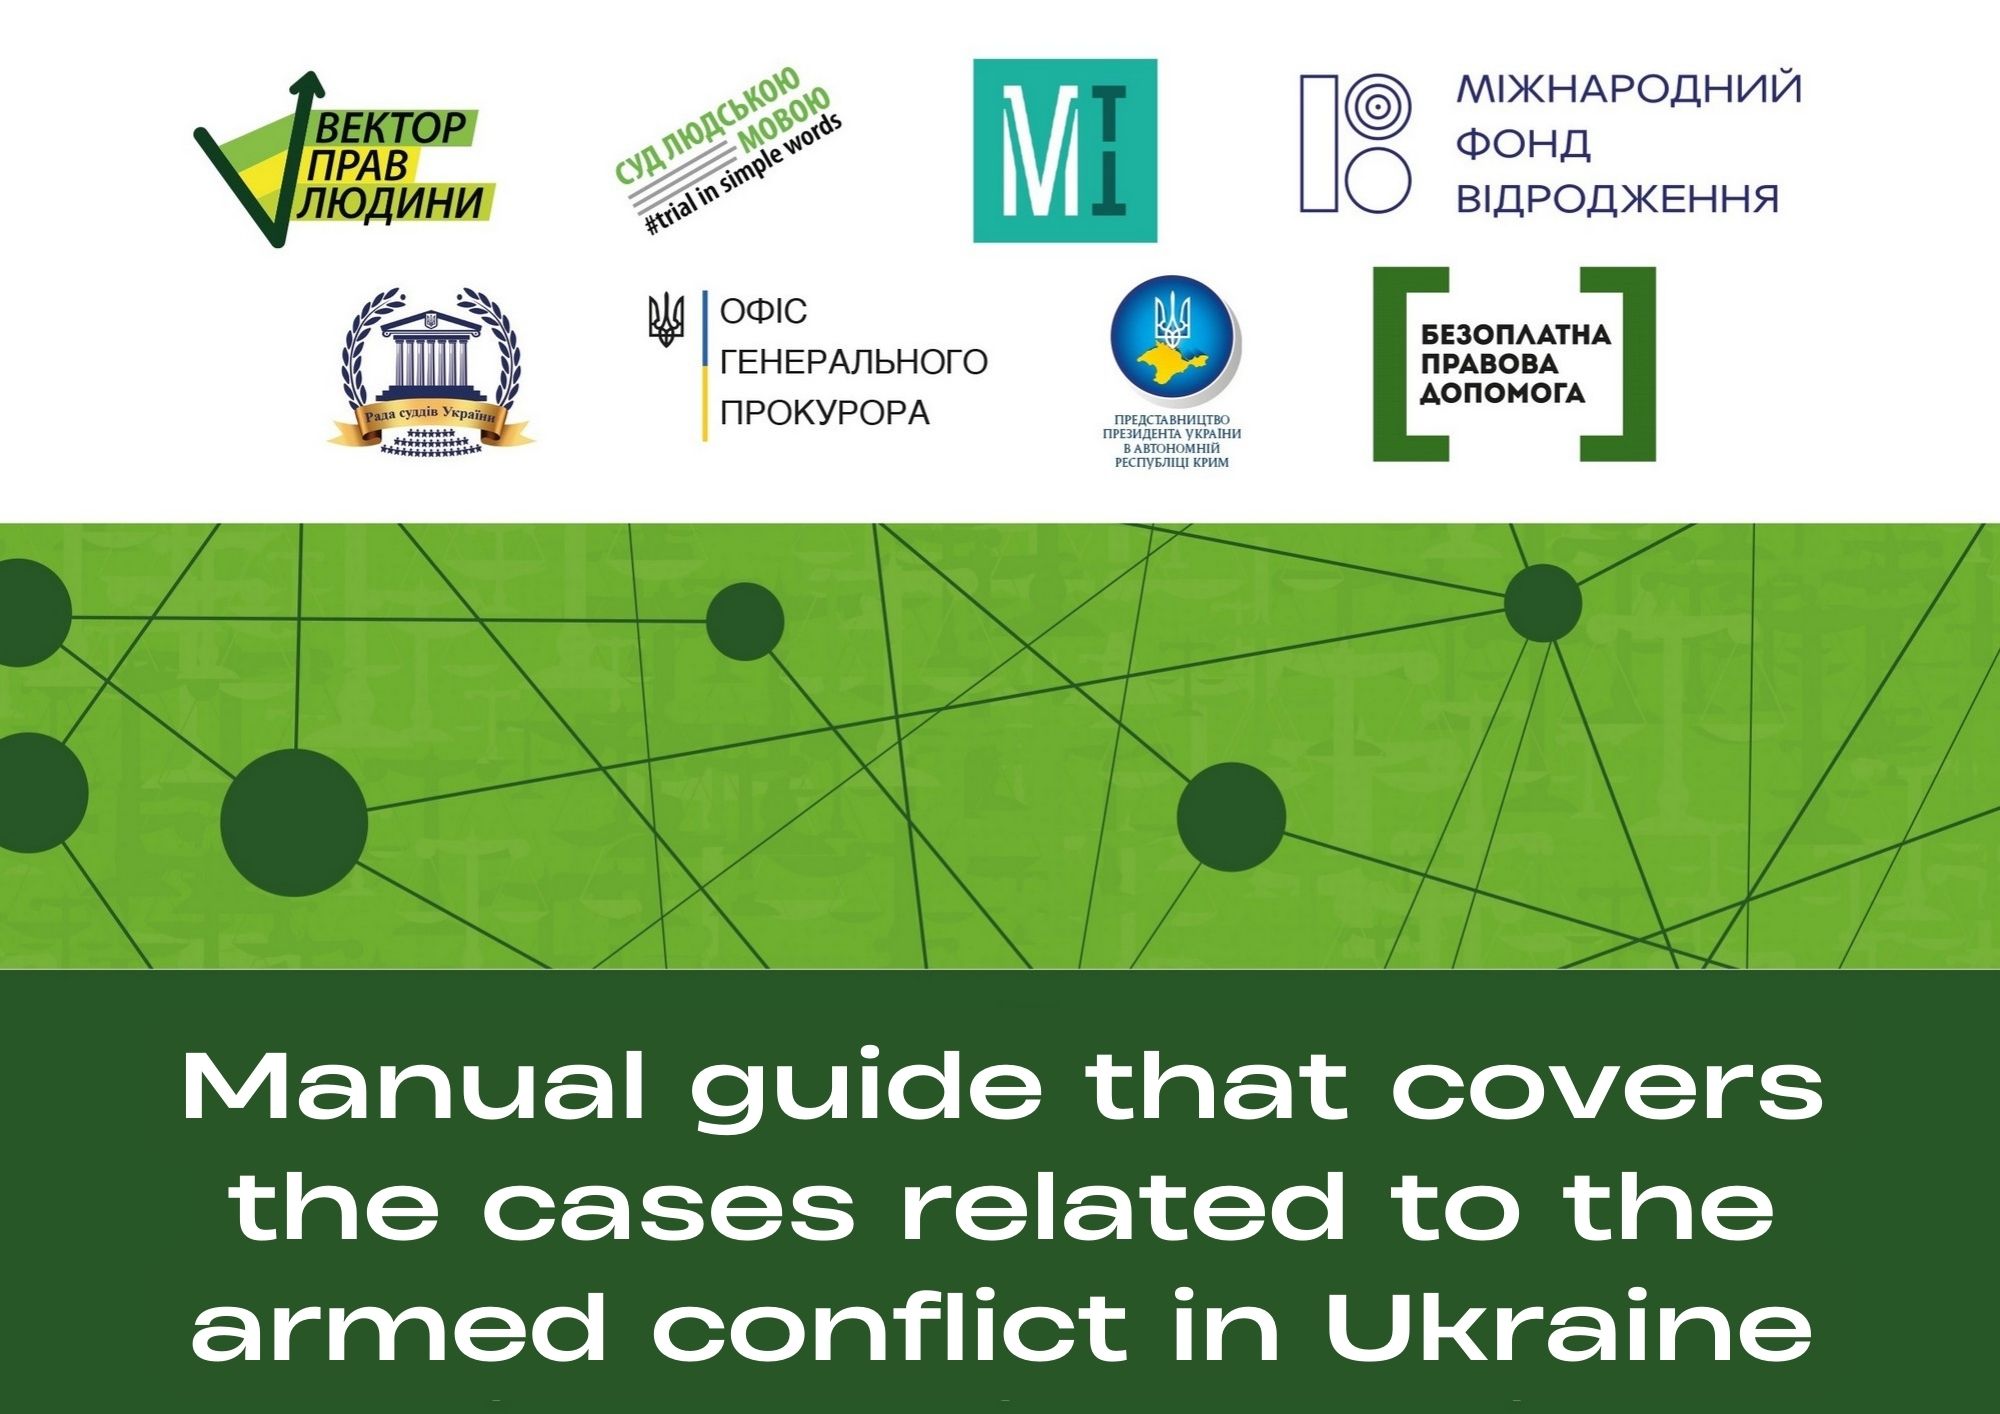 Manual guide to cover the cases related to the armed conflict in Ukraine